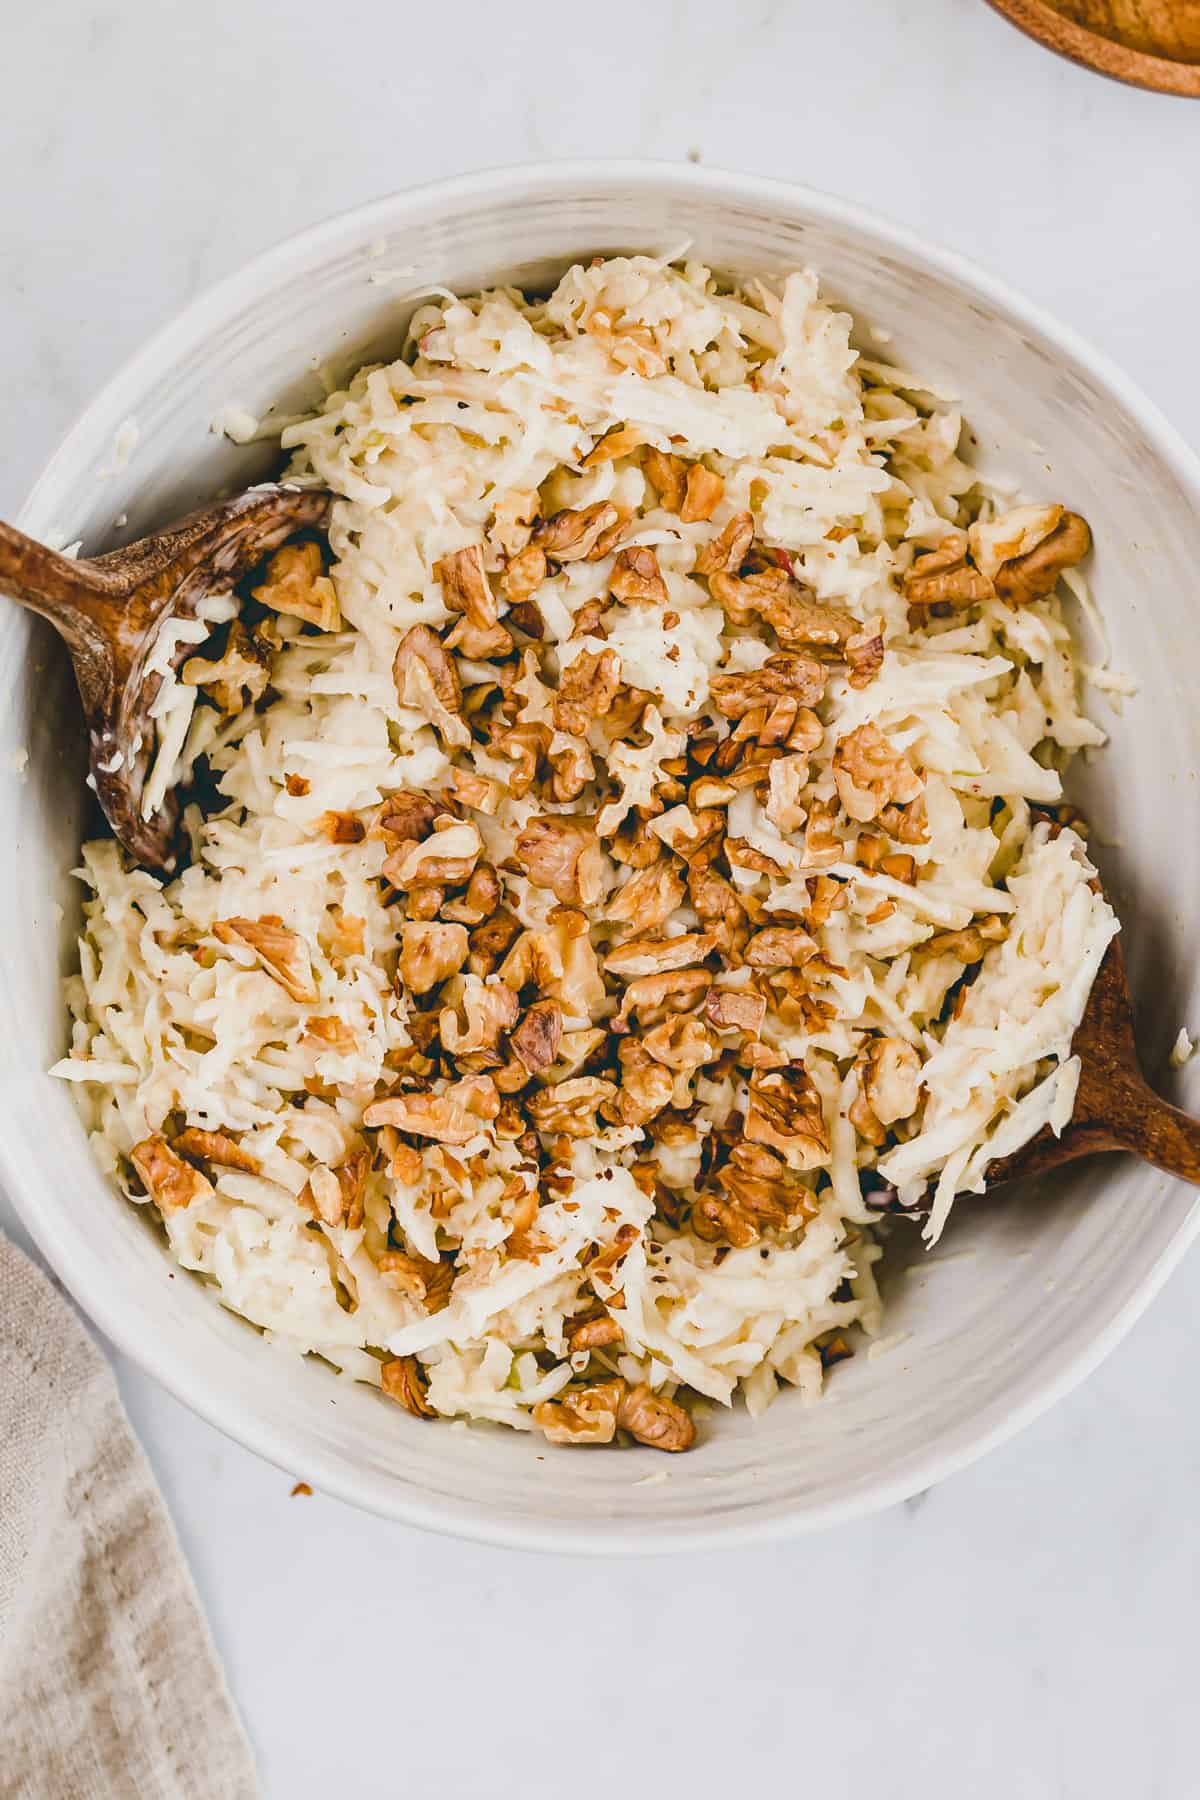 celery root salad with walnuts